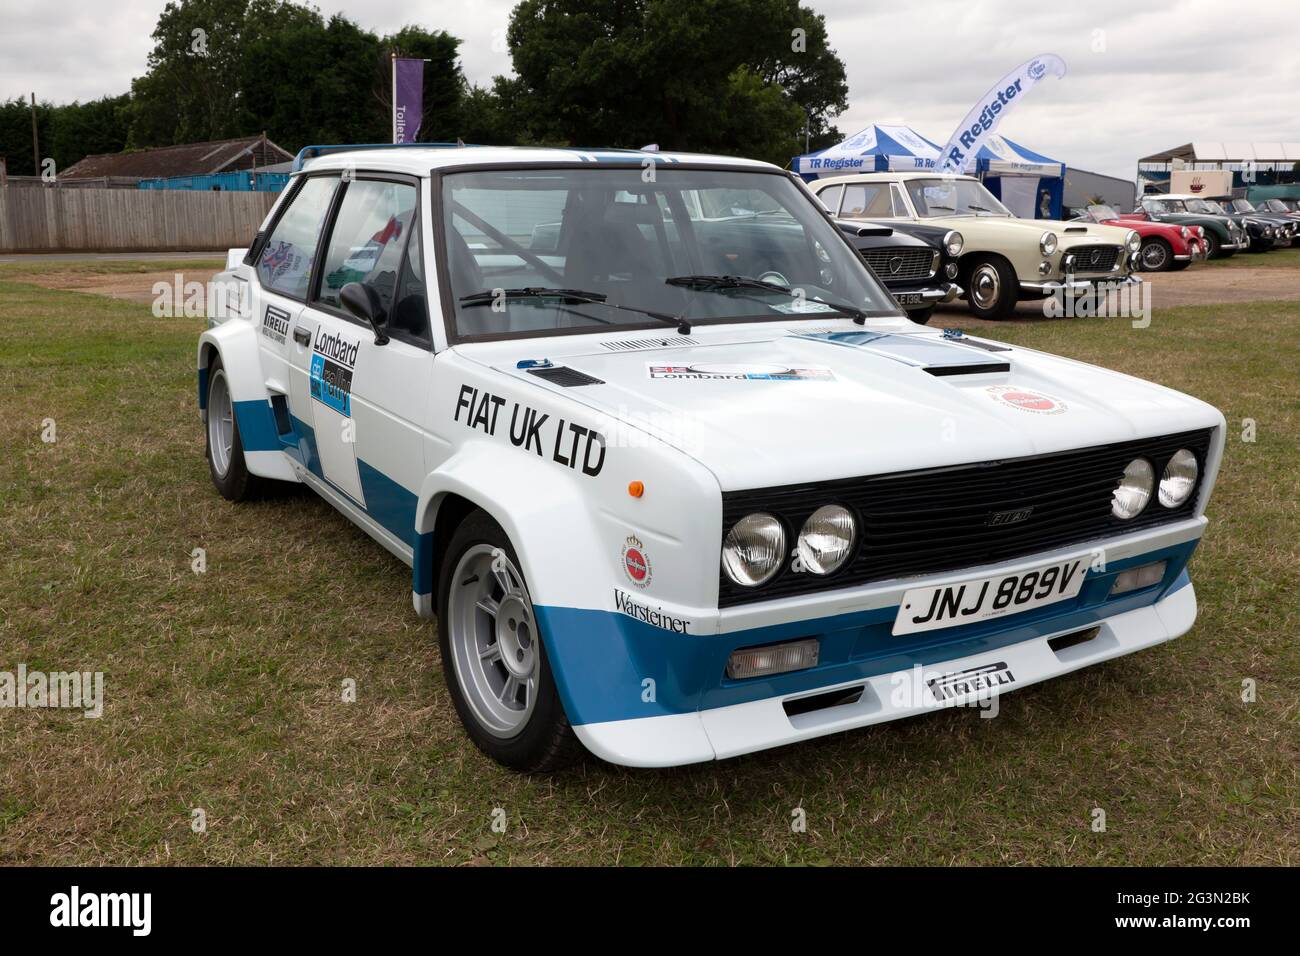 Three-quarters front view  of a White, 1979, Fiat  Abarth 131 Rally Car, on display at the 2017, Silverstone Classic Stock Photo